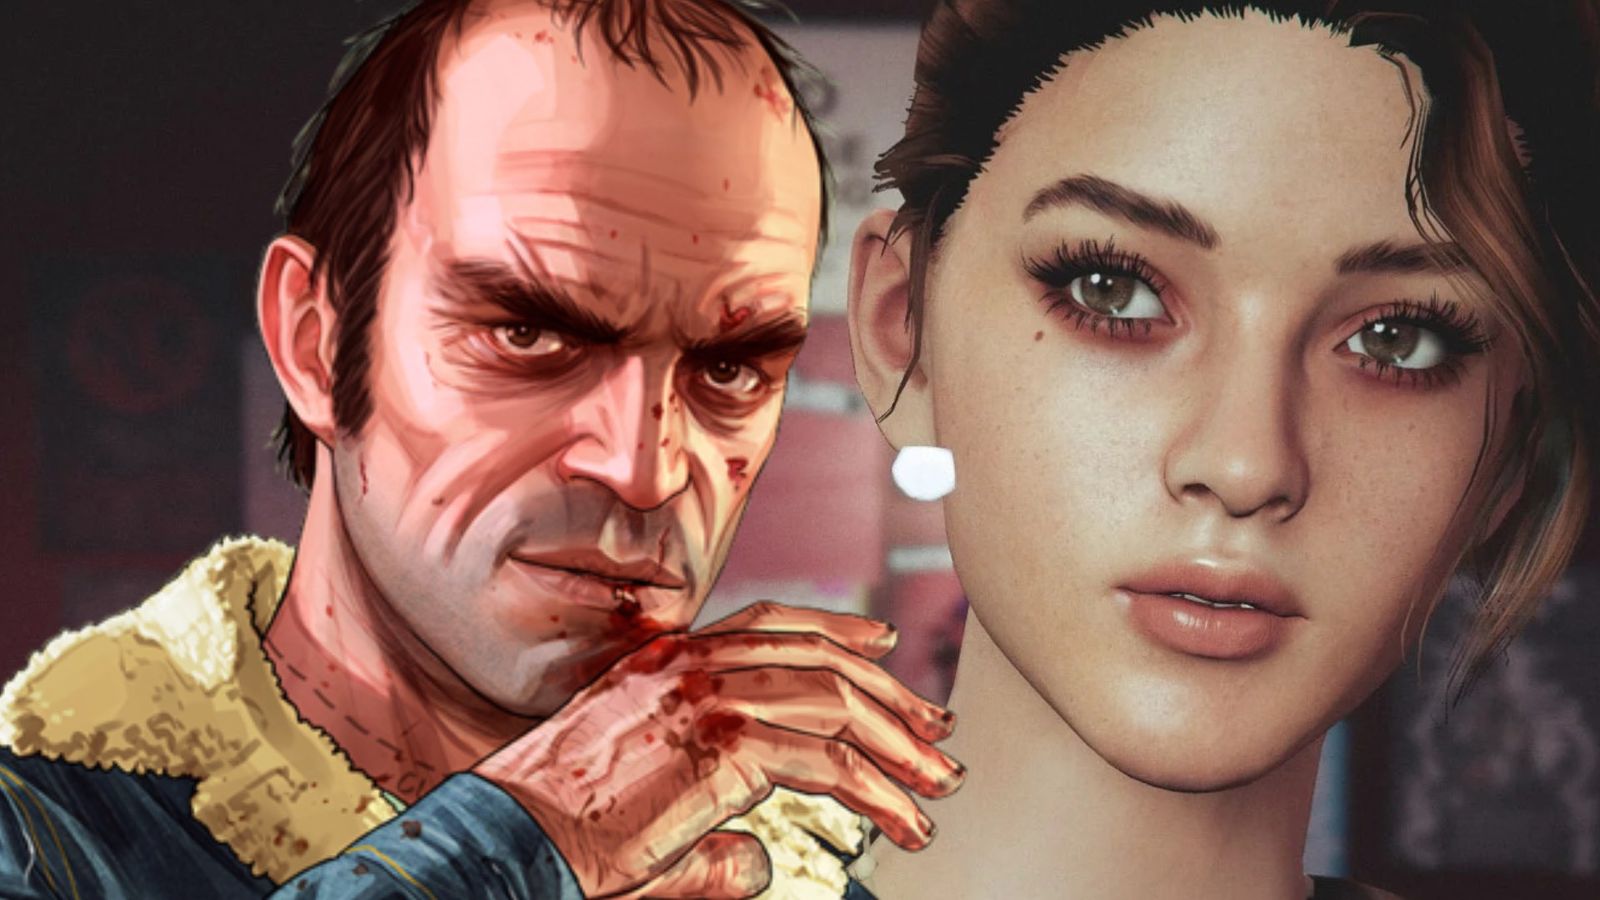 Trevor from GTA next to a virtual woman